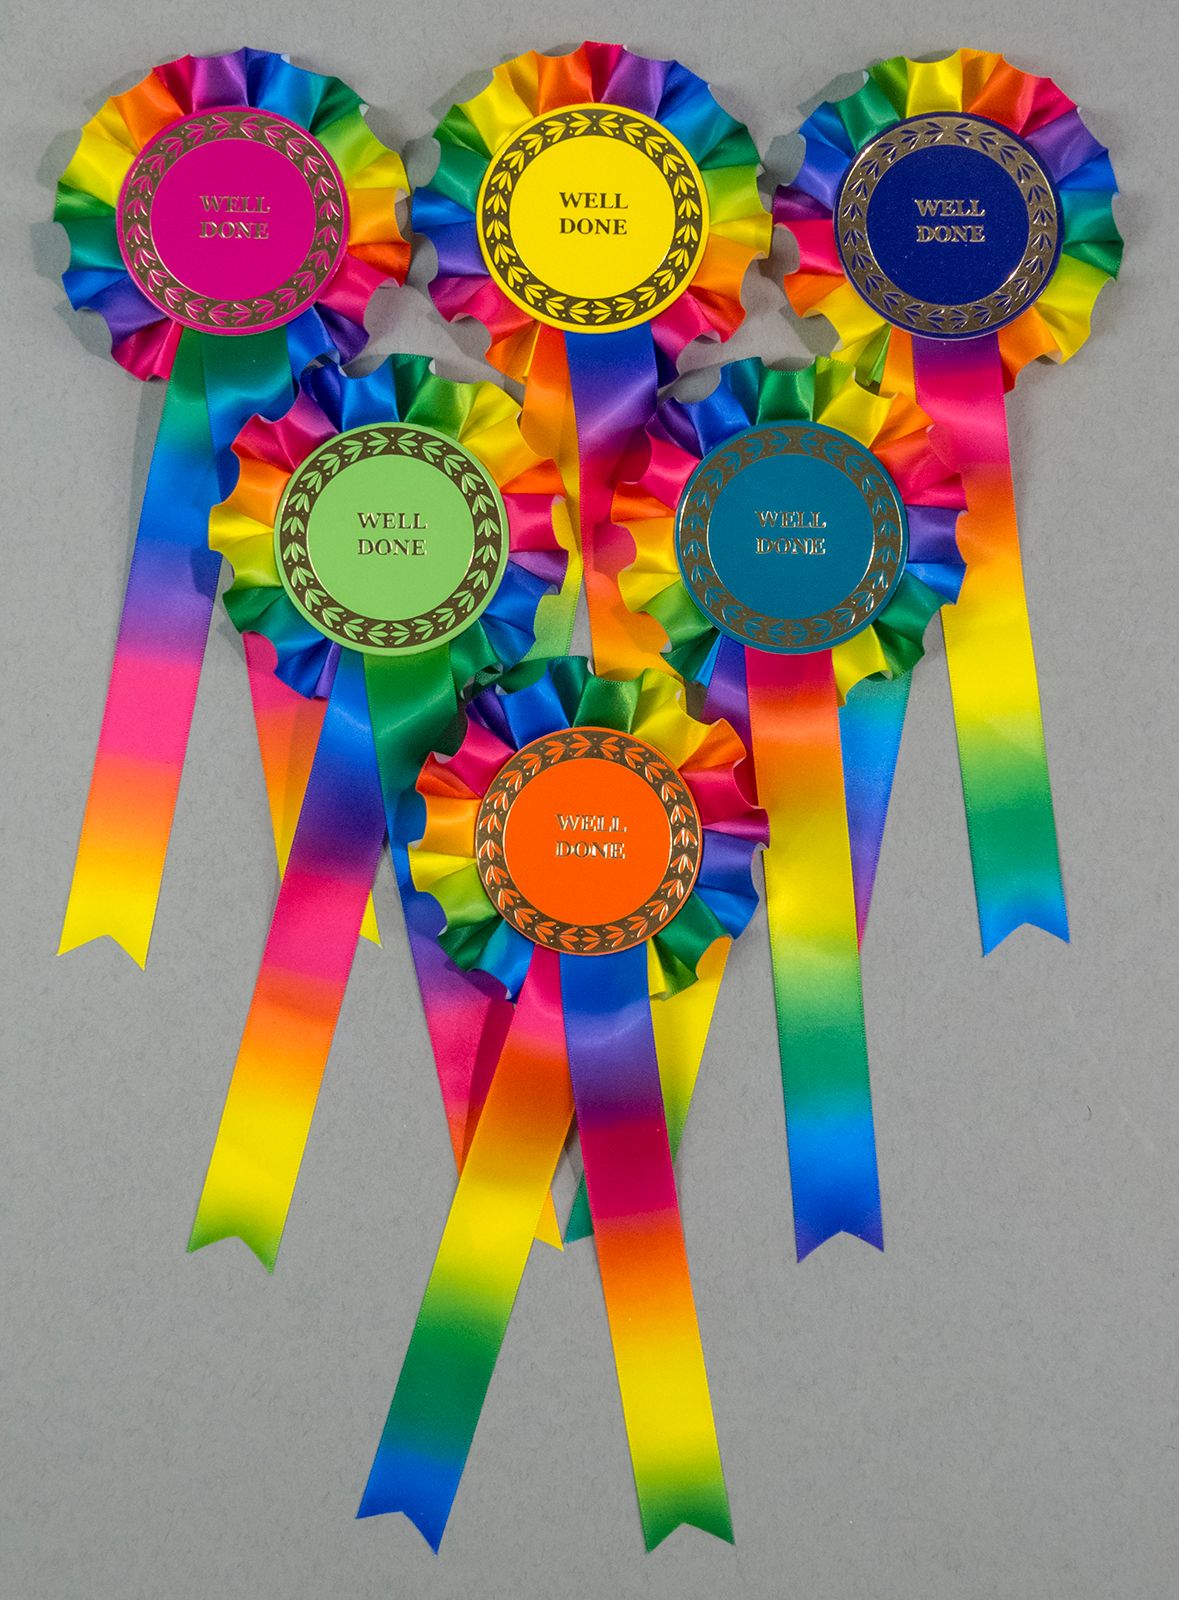 Rainbow Large 1-Tier Rosettes, Set of 6 Special, Well Done or Clear Round